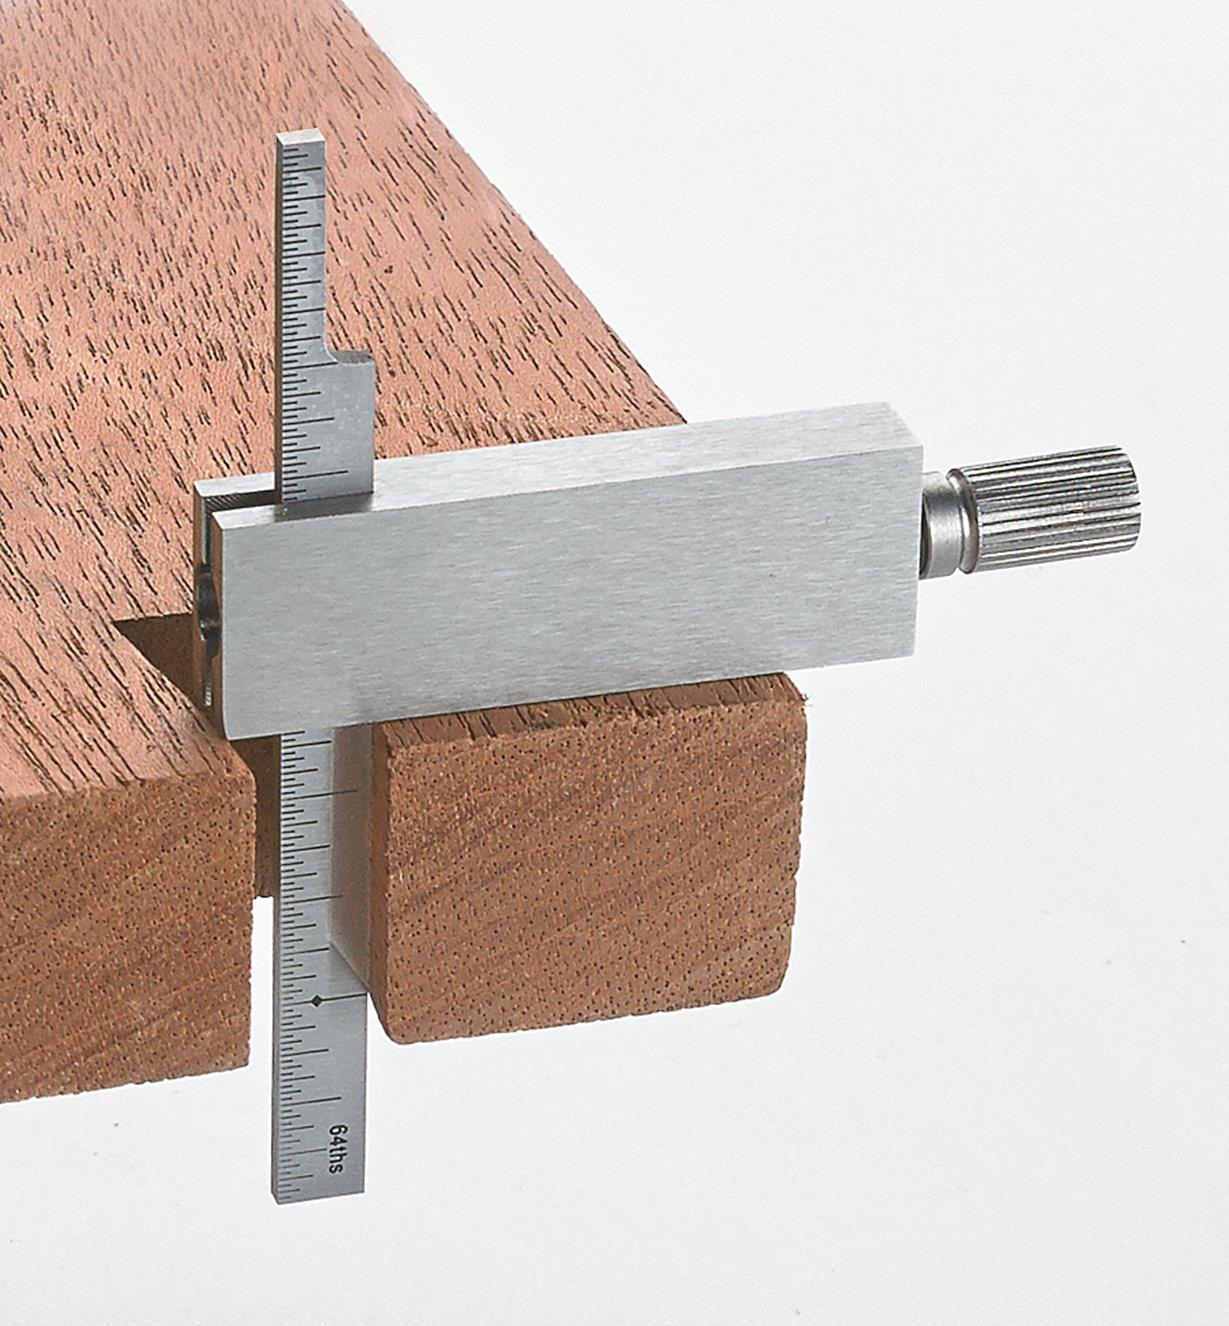 Using the small double square to check for square on a hand-cut dovetail